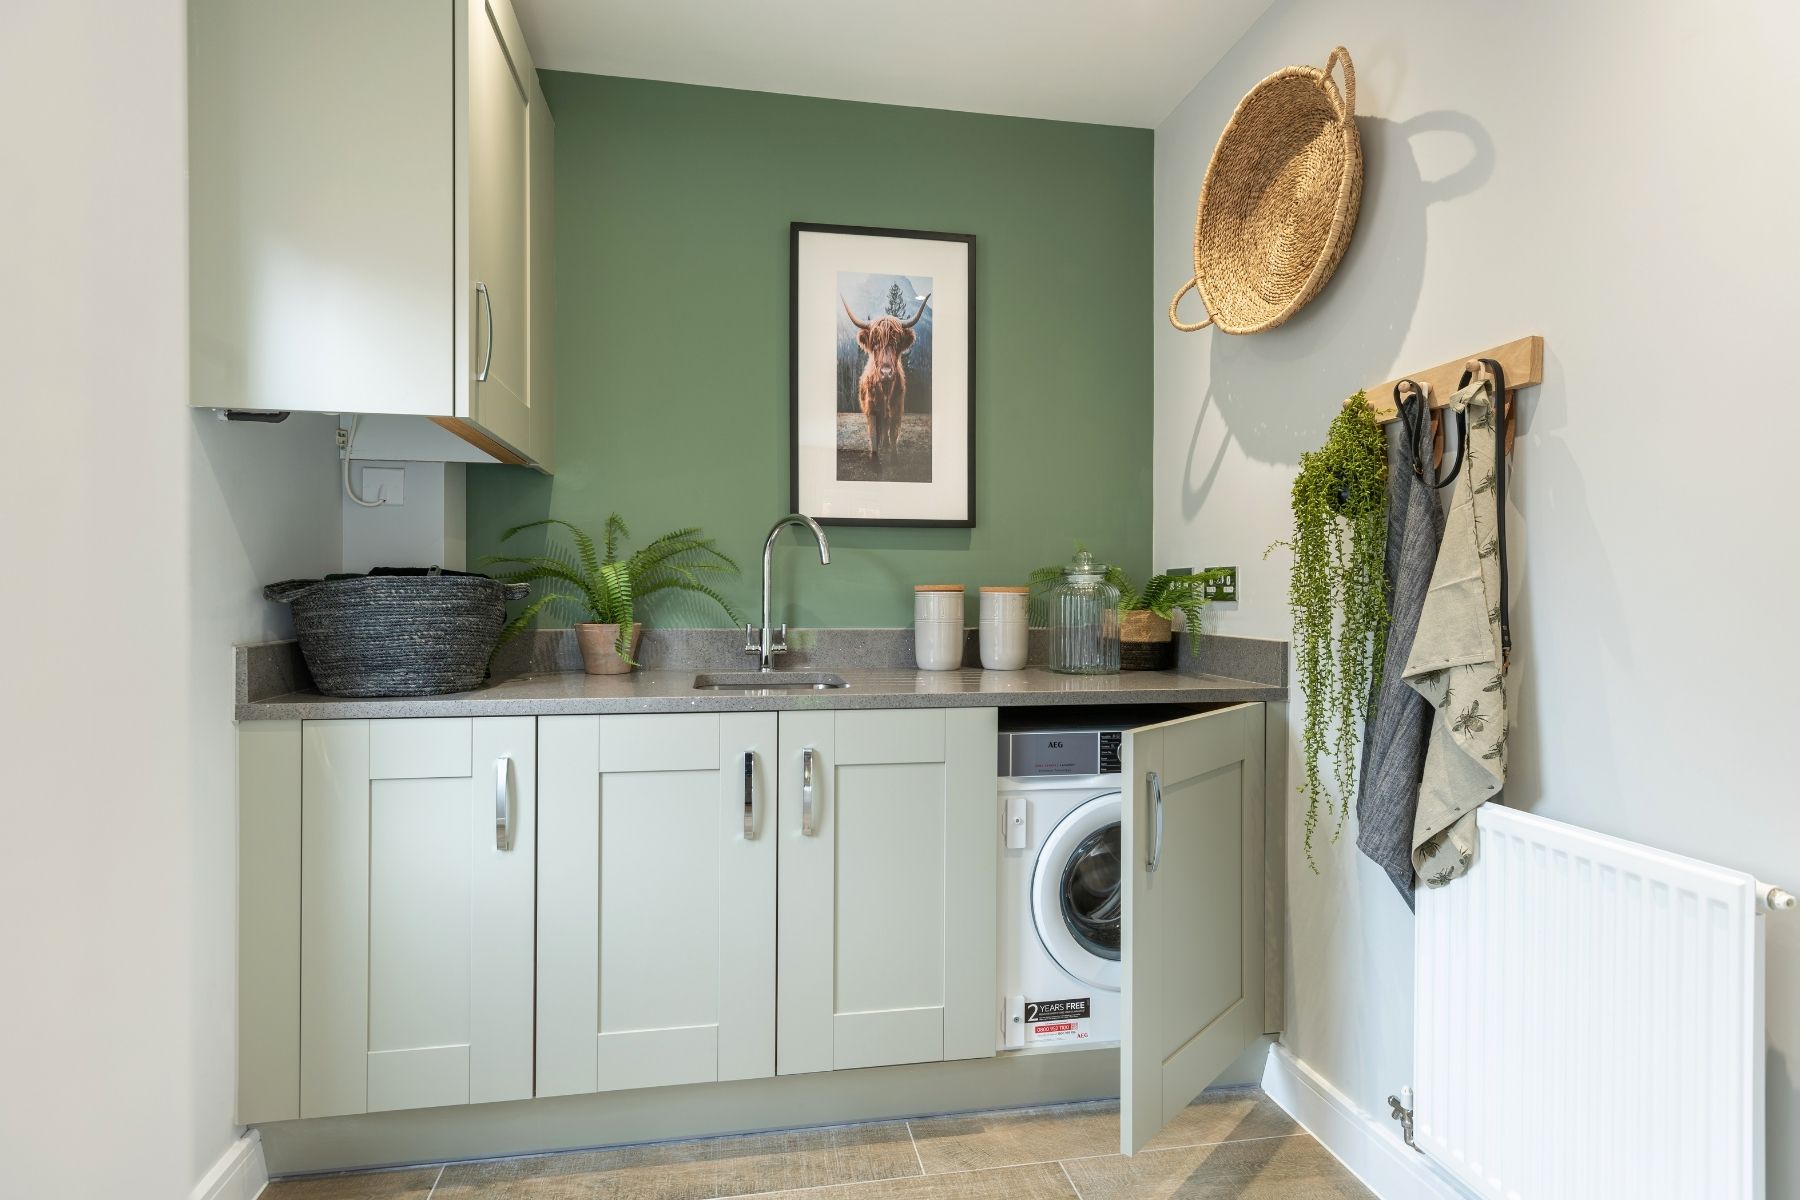 Utility room ideas ‧ Taylor Wimpey